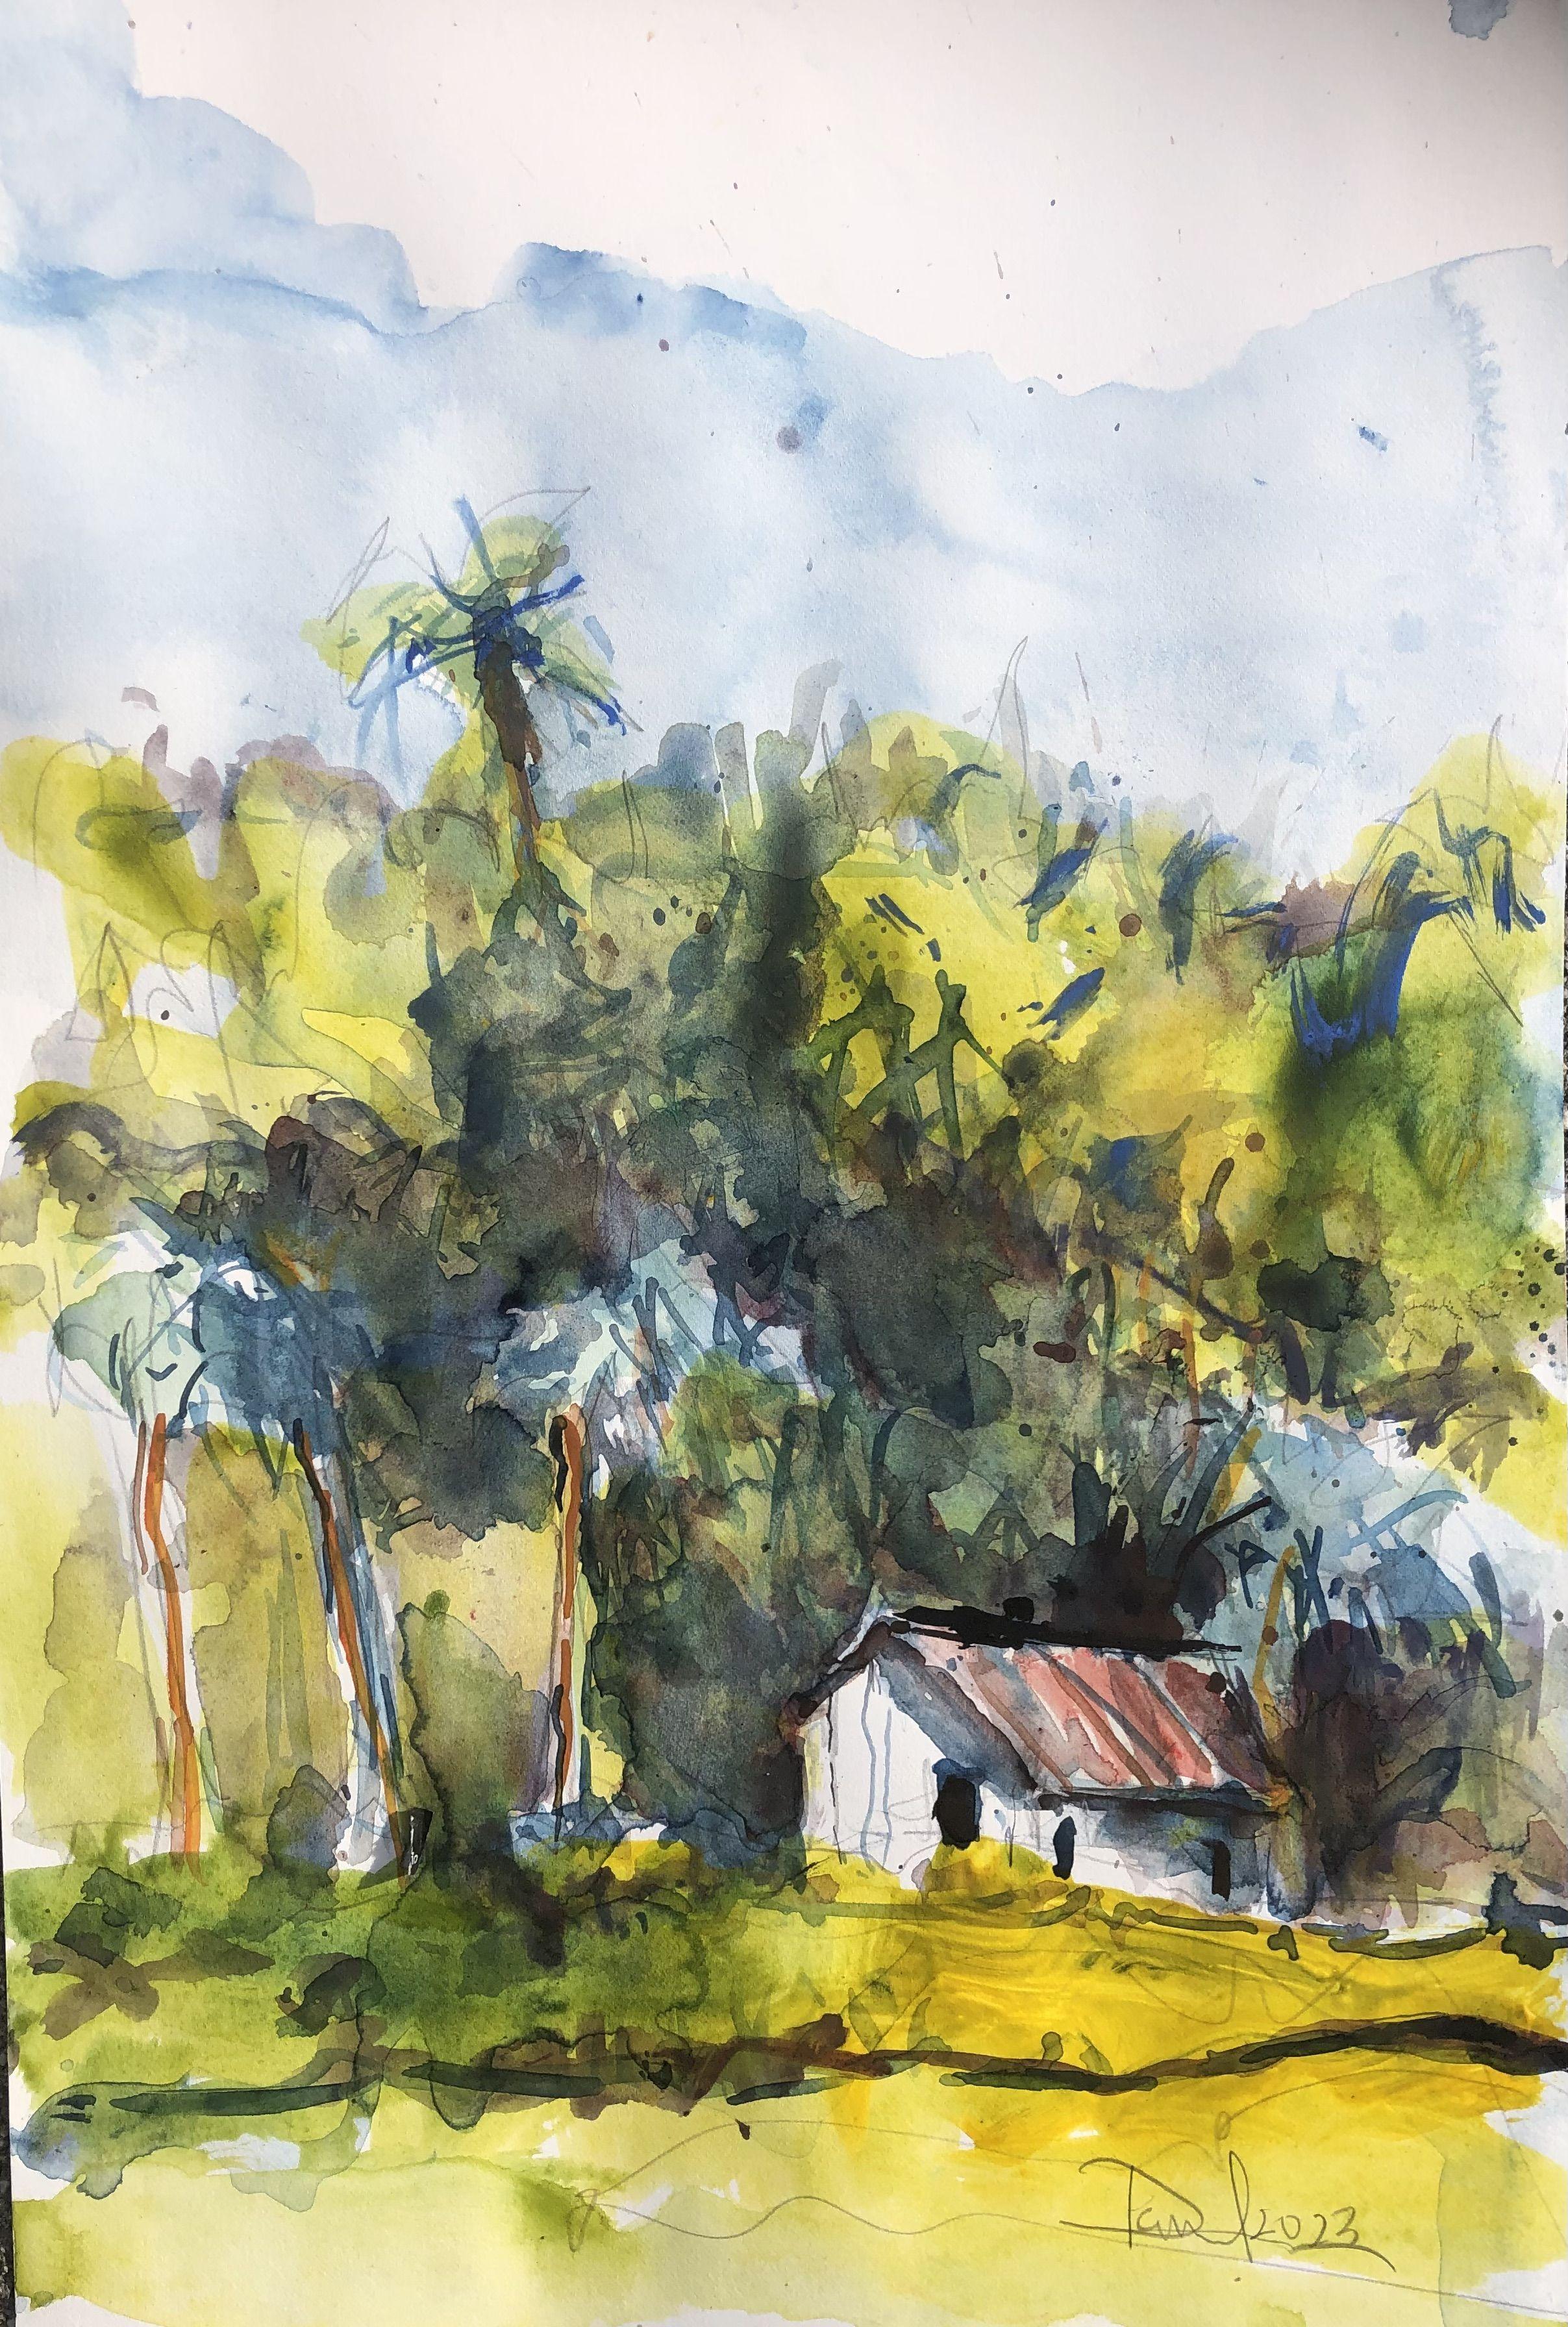 Philippines Environs, Painting, Watercolor on Watercolor Paper - Art by Daniel Clarke